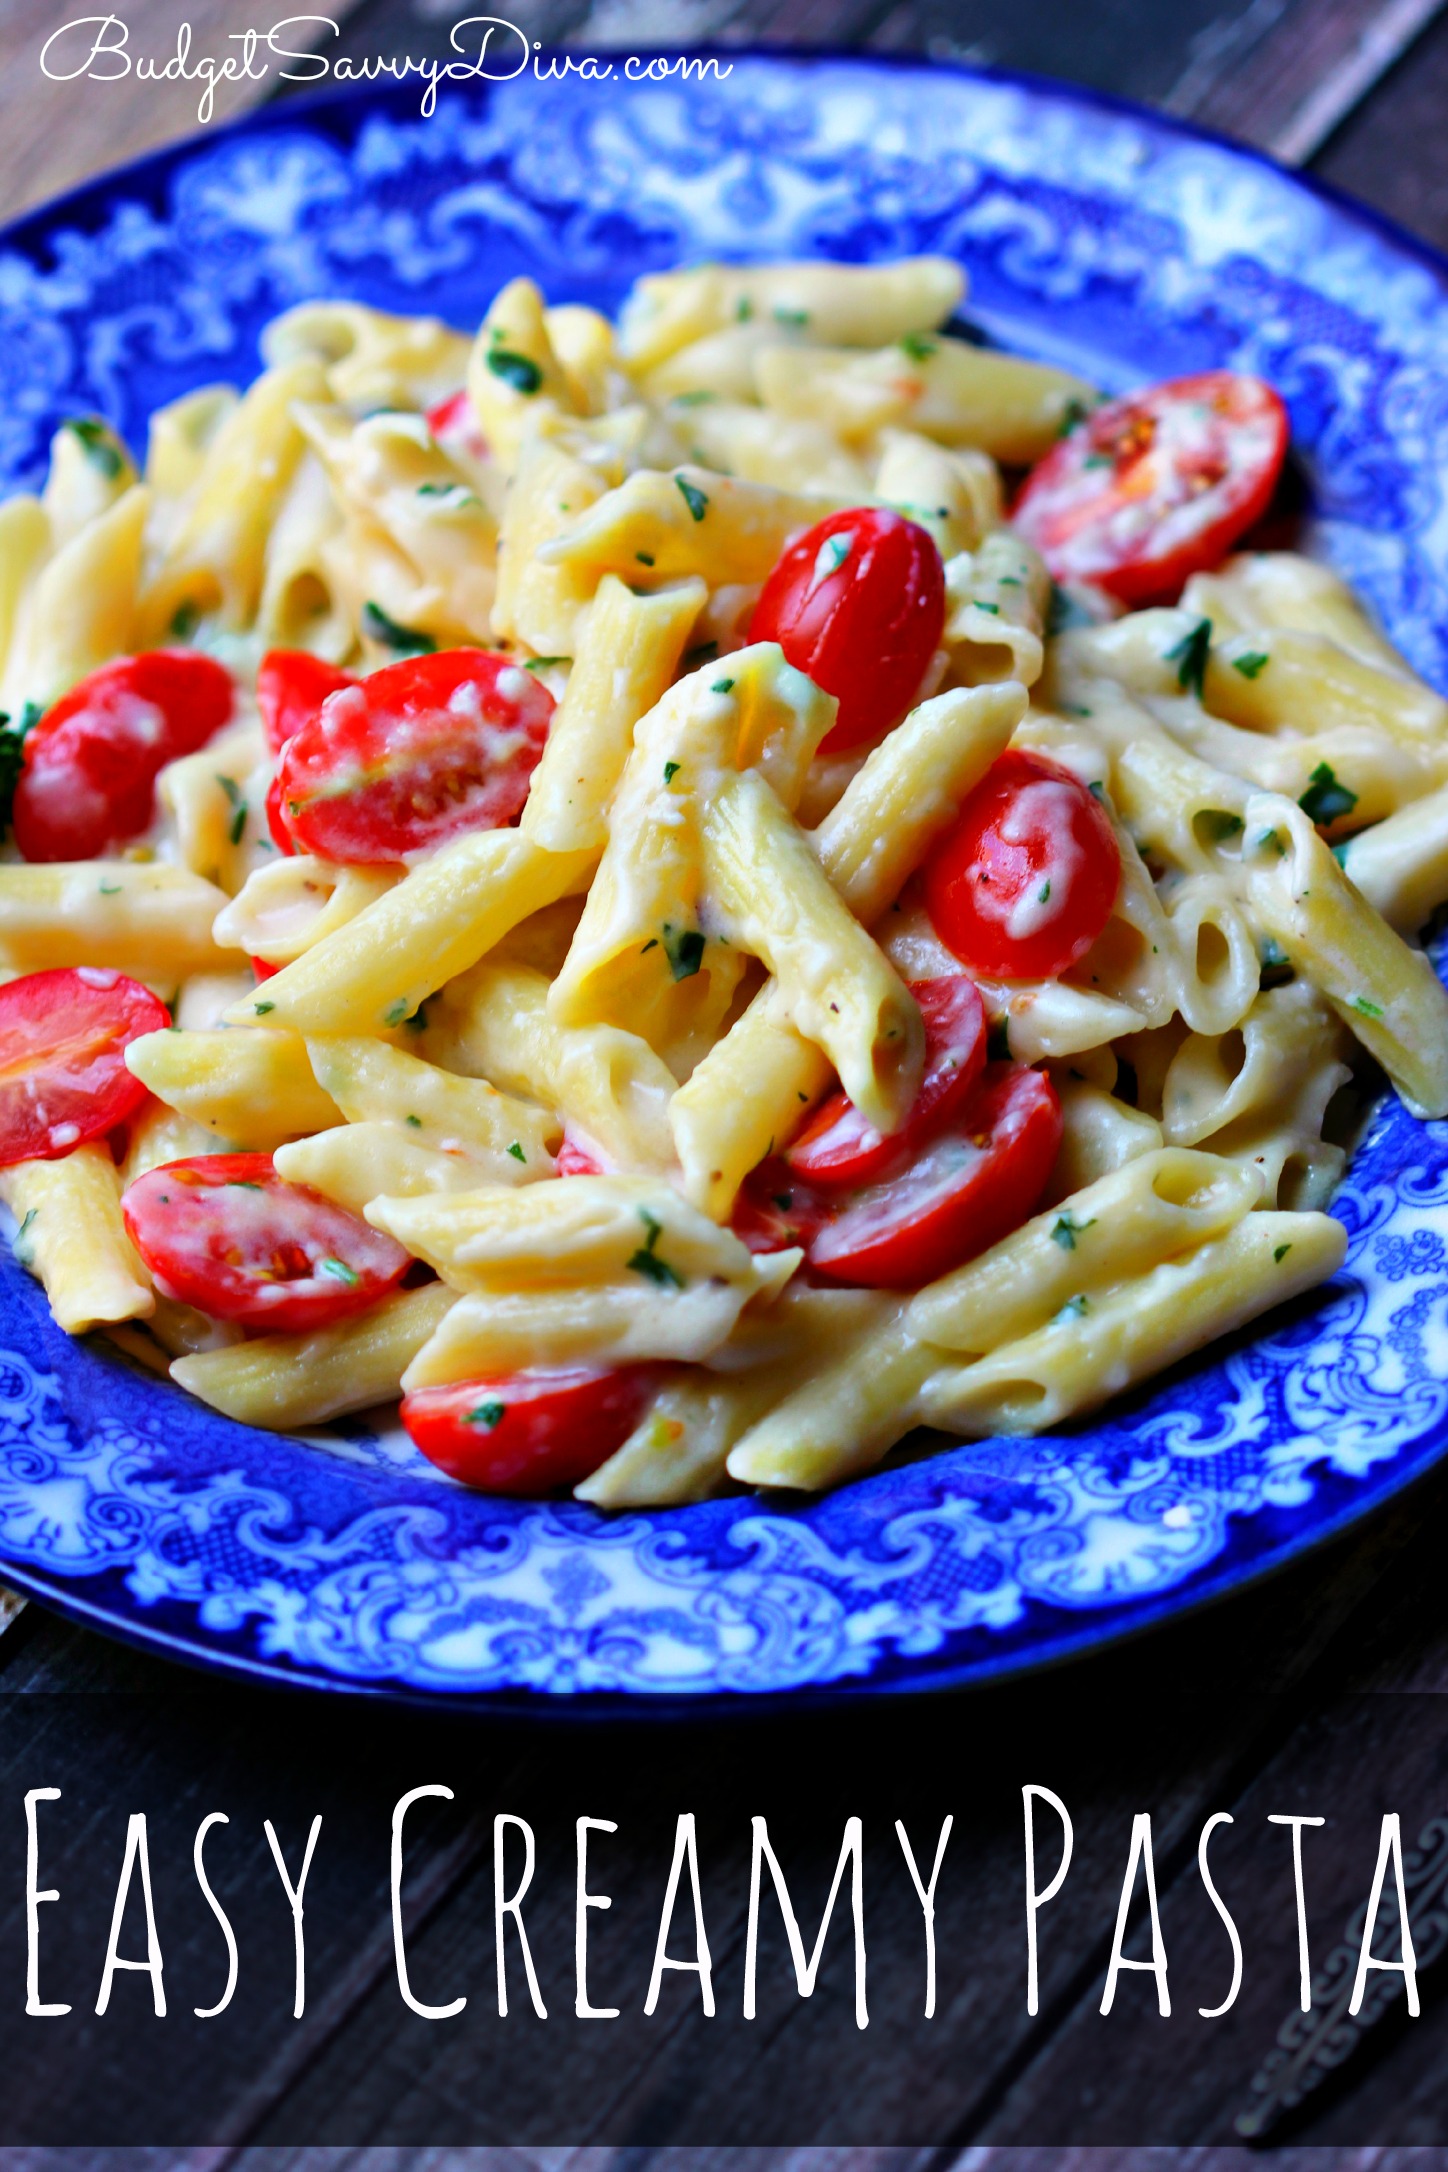 43+ Recipes For Dinner Pasta Images - HealthMgz - Healthy Living, Today